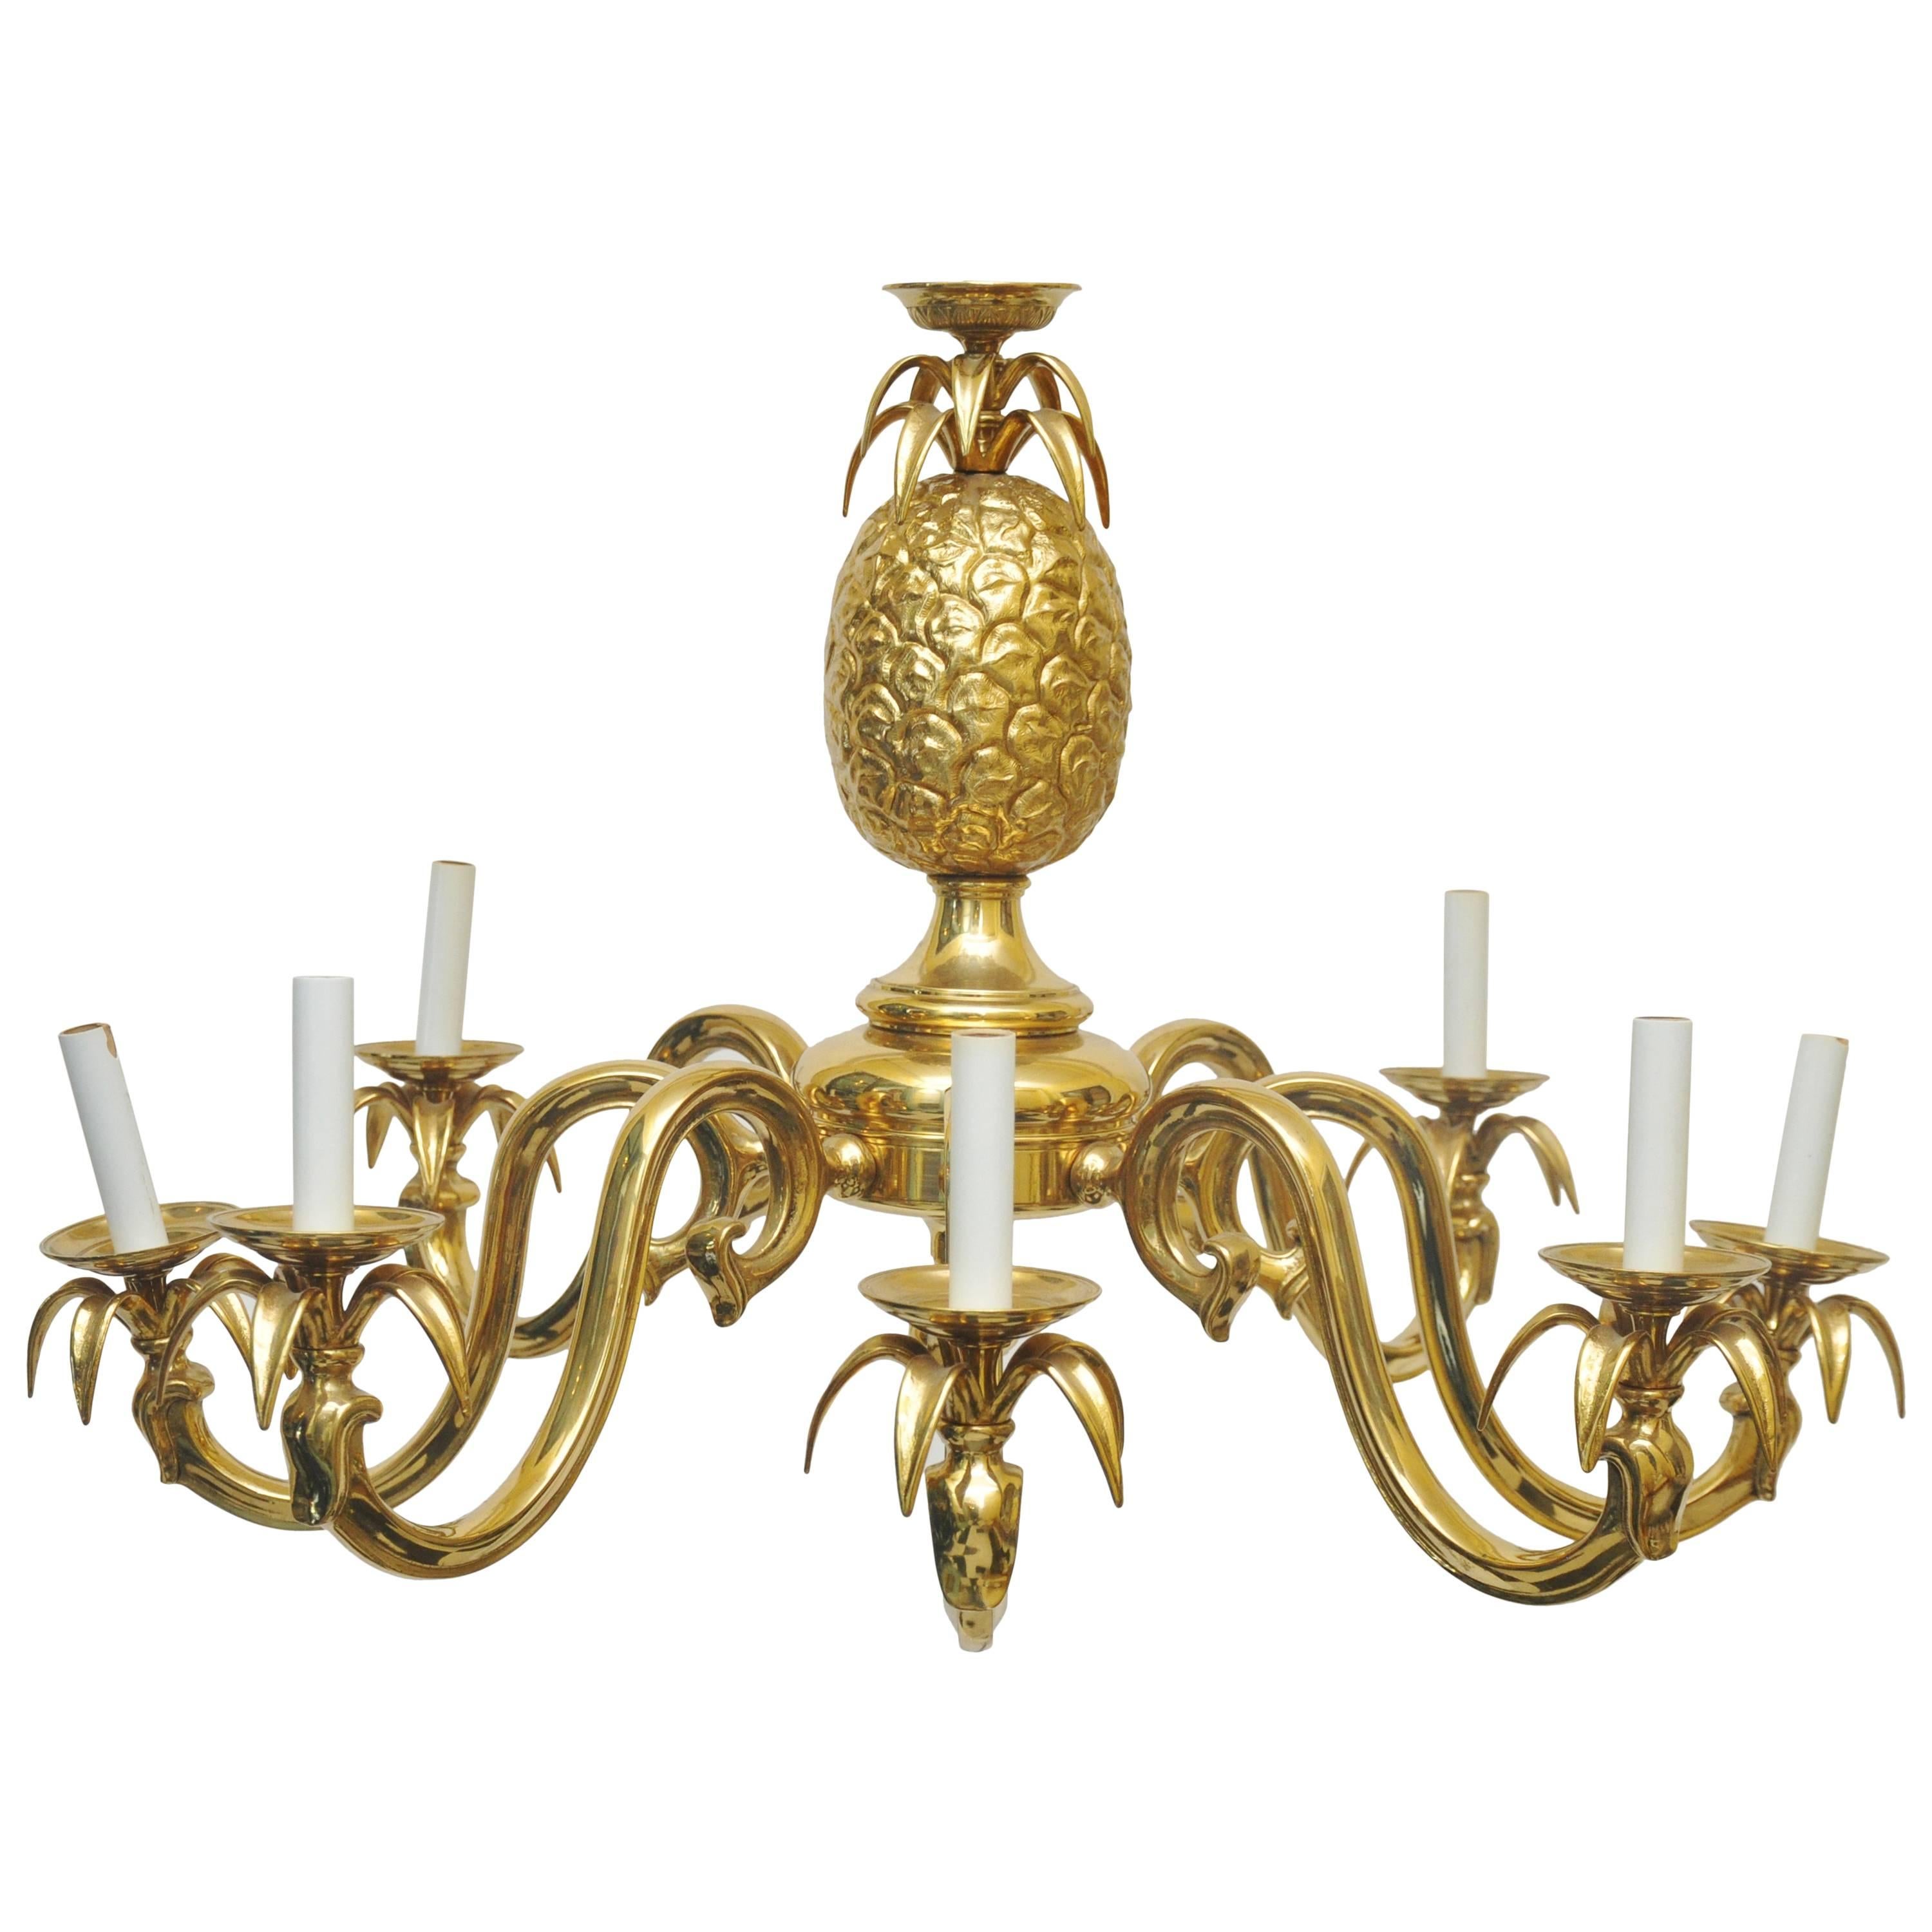 Large-Scale Solid Brass Pineapple Chandelier